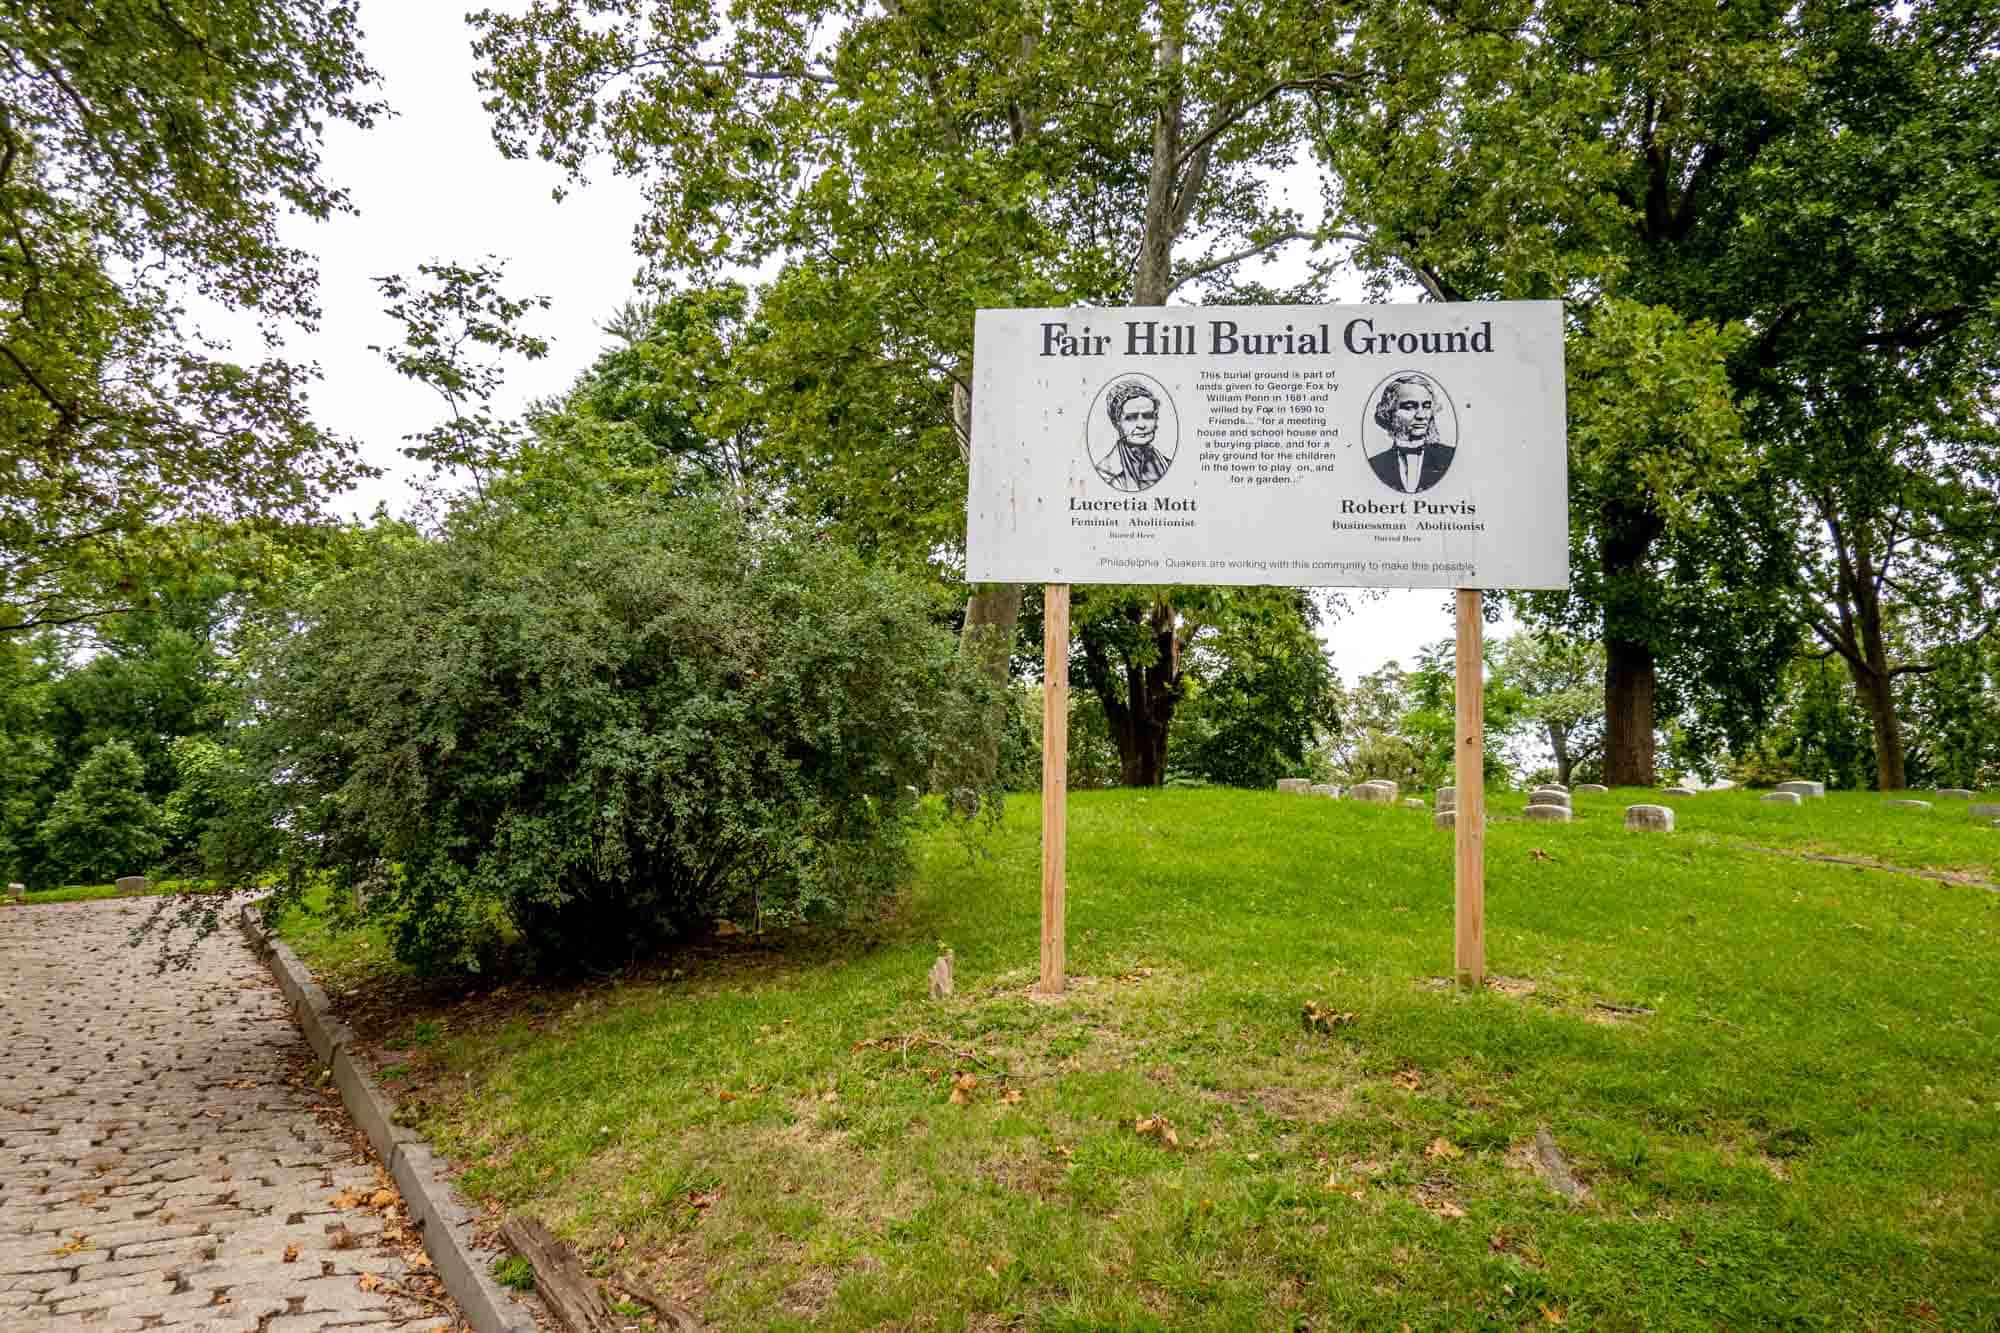 Sign at Fair Hill Burial Ground with portraits of Lucretia Mott and Robert Purvis.